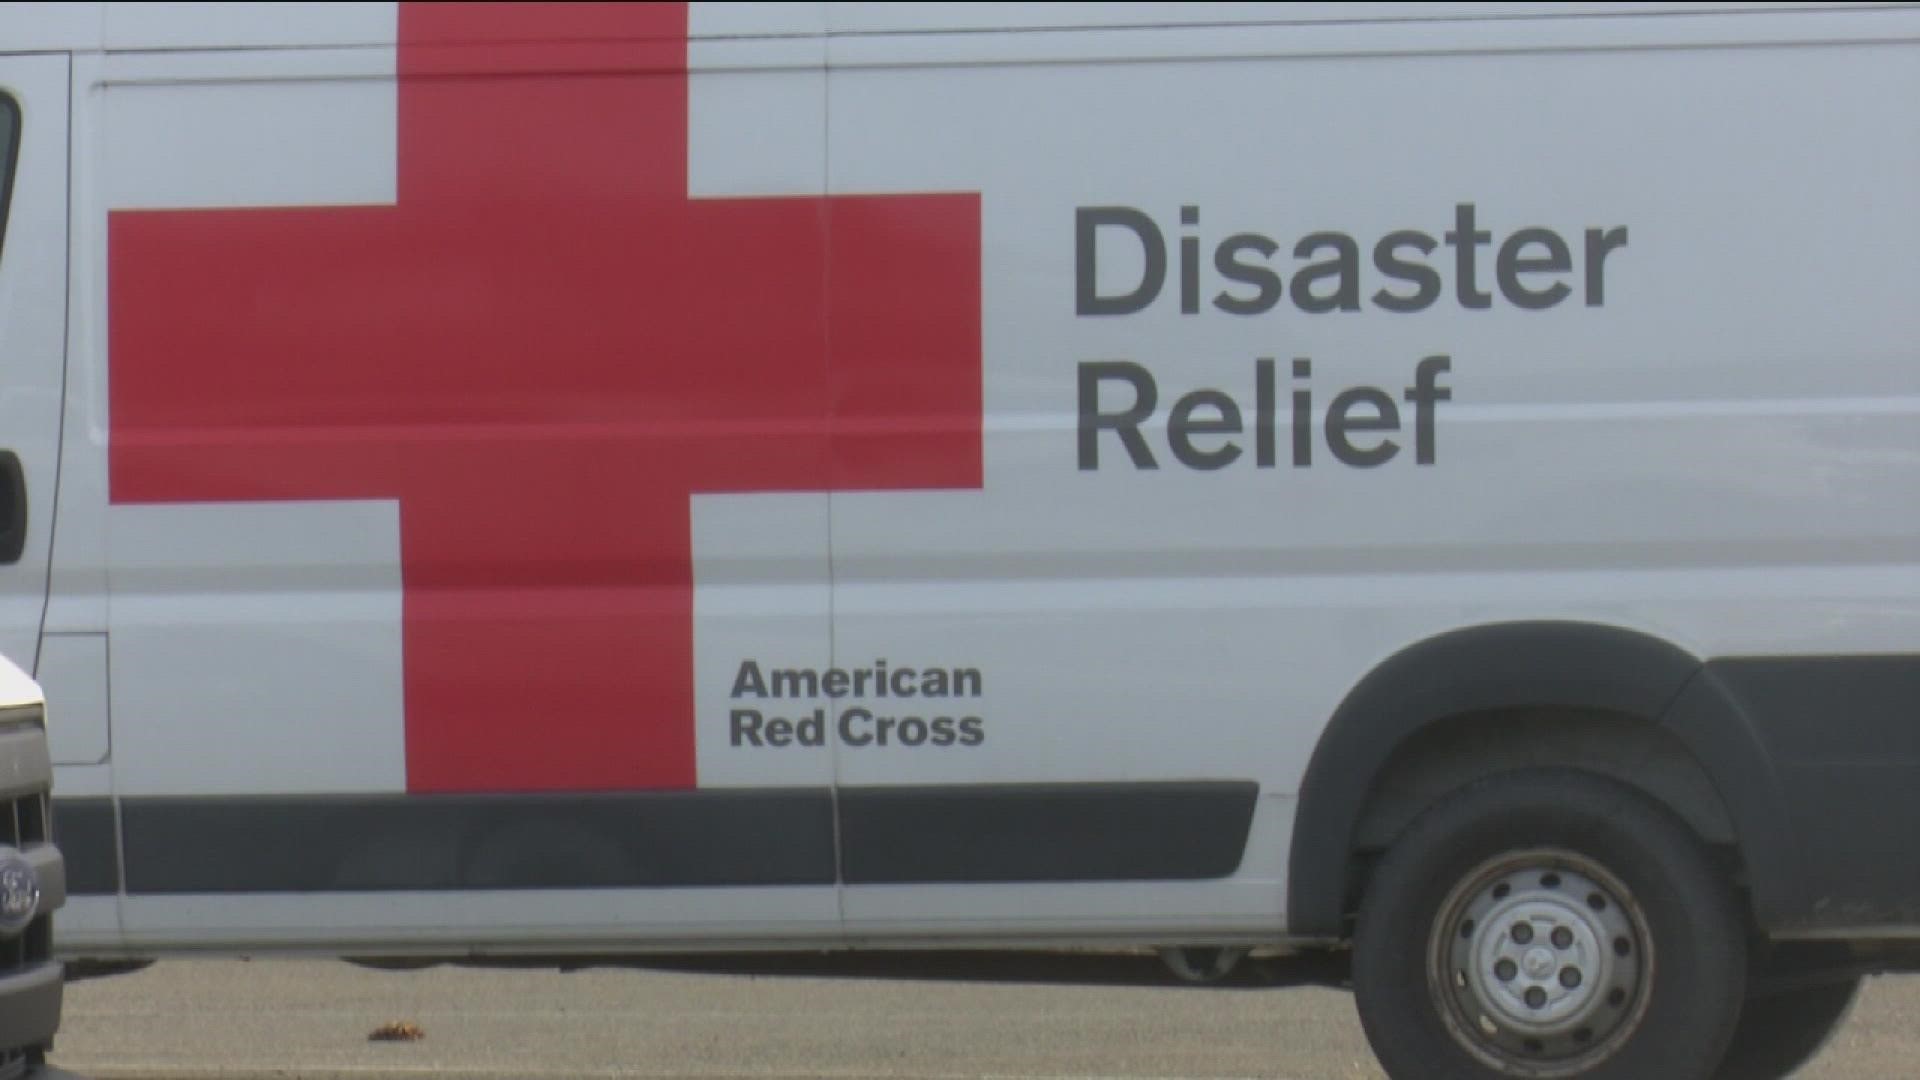 Amy Steigerwald is at the American Red Cross to highlight the Ohio volunteers that are making their way to Florida to help those affected by Hurricane Ian.